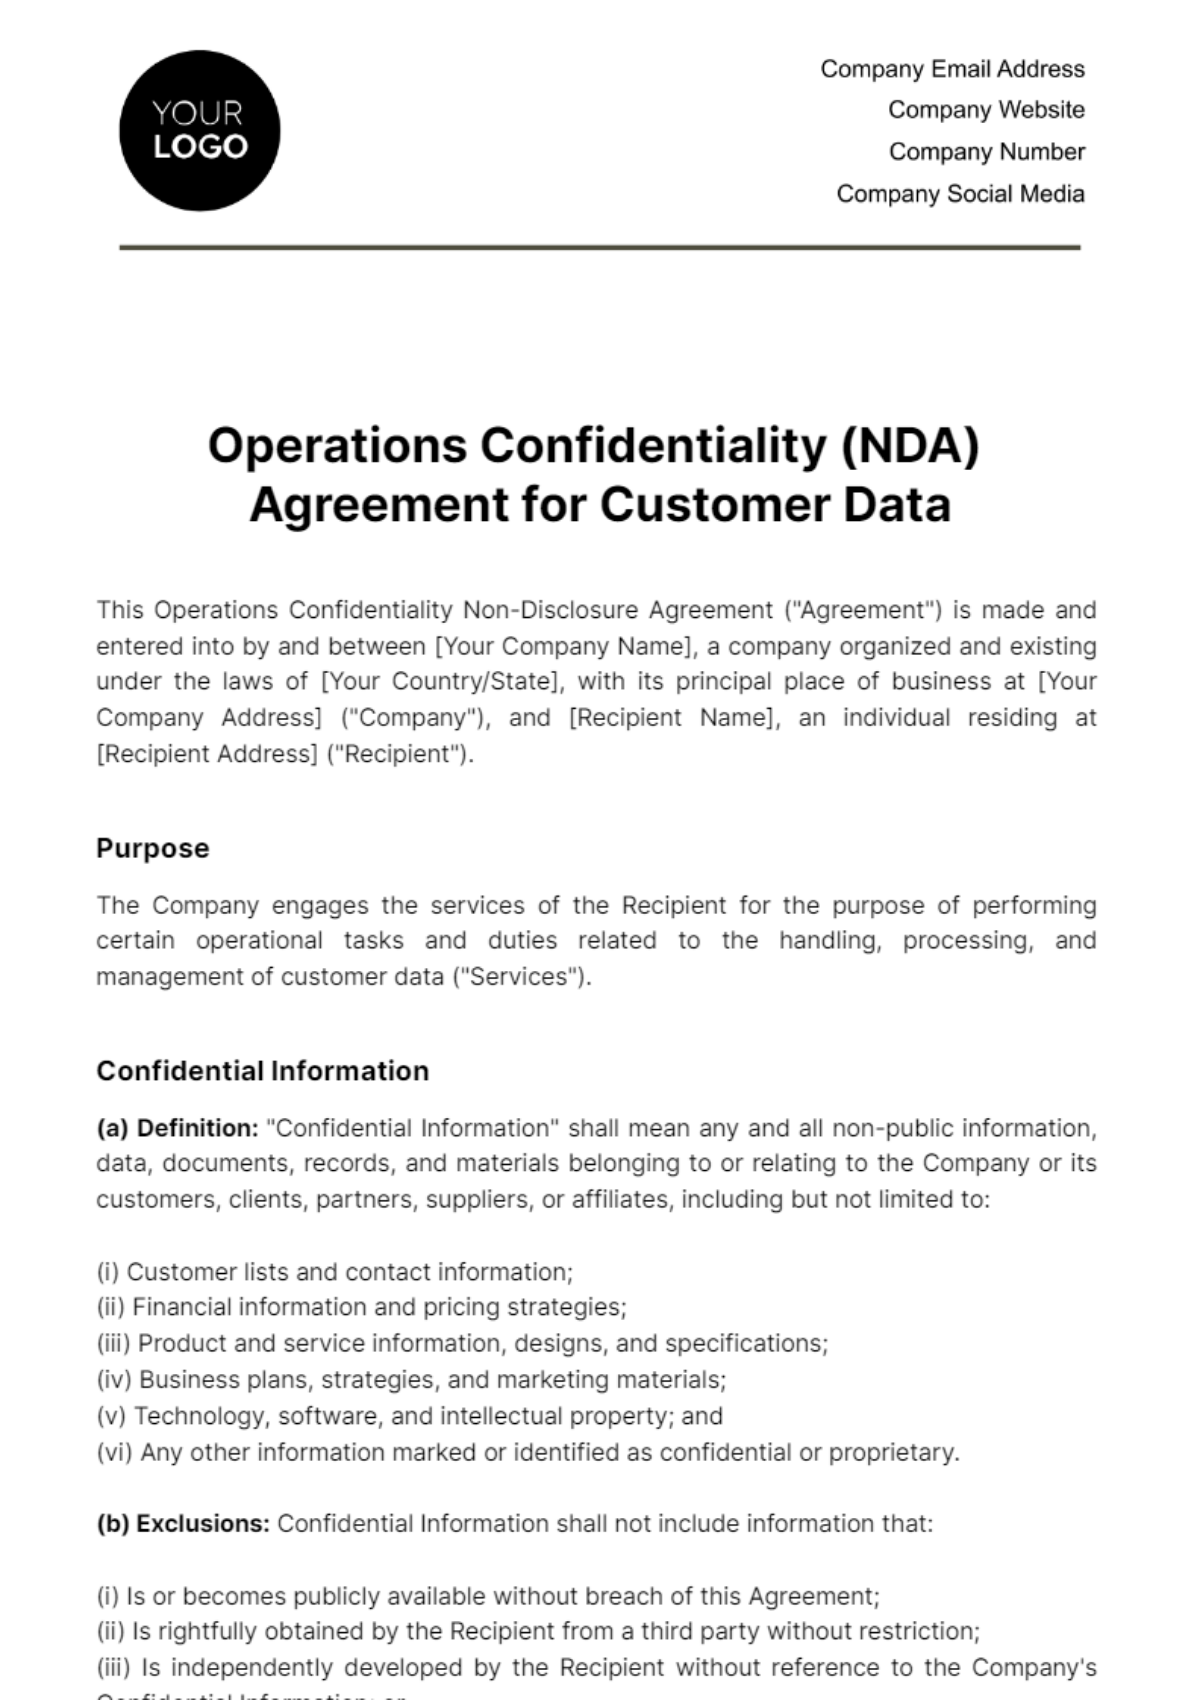 Free Operations Confidentiality (NDA) Agreement for Customer Data Template